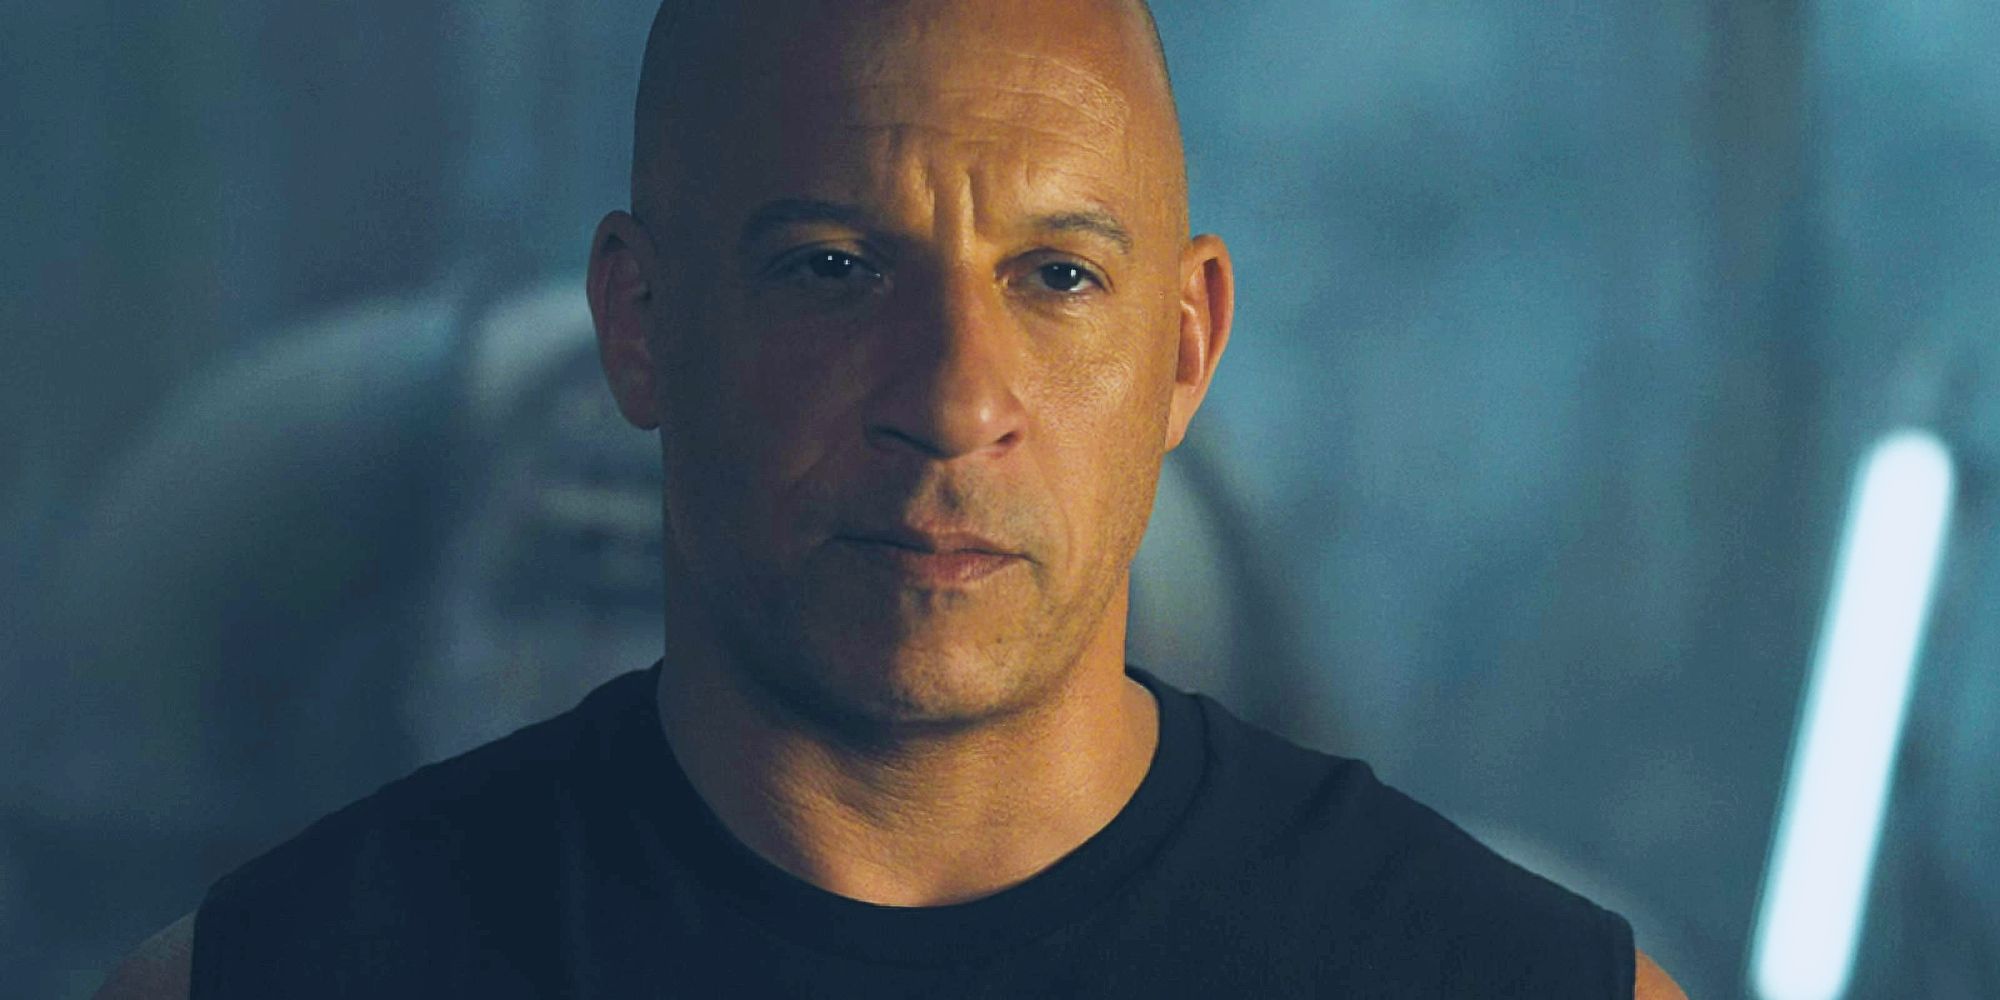 Vin Diesel as Dominic Toretto in Fast and Furious 9